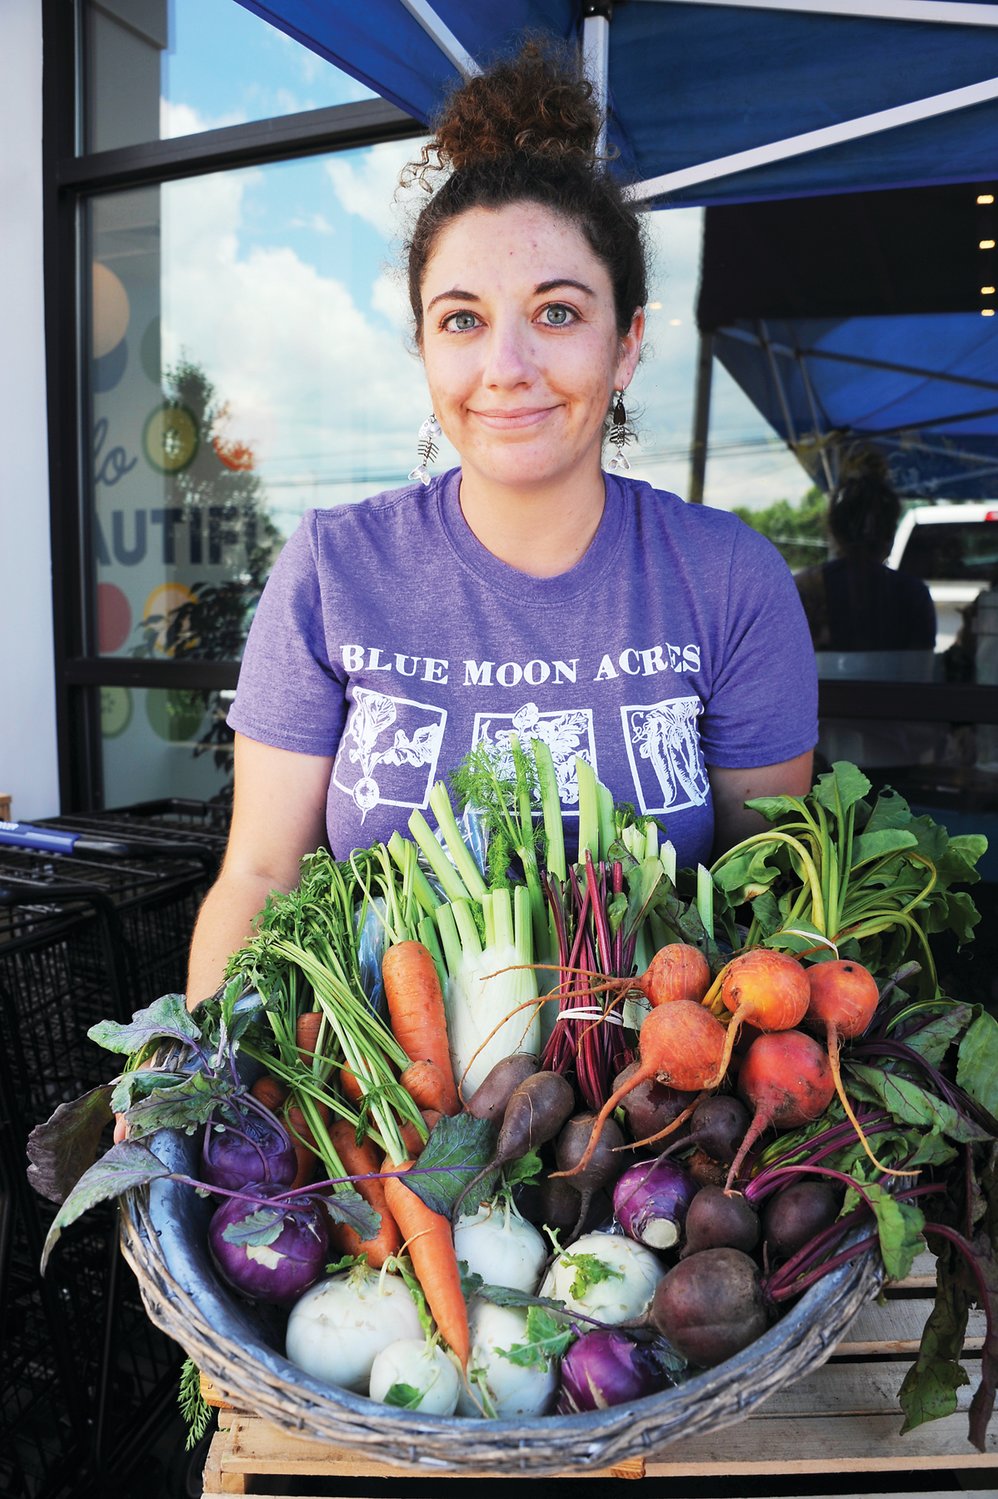 Sara Pavics from Blue Moon Acres showing off local veggies for sale in Poppy’s Greengrocer. Photograph by Carol Ross.